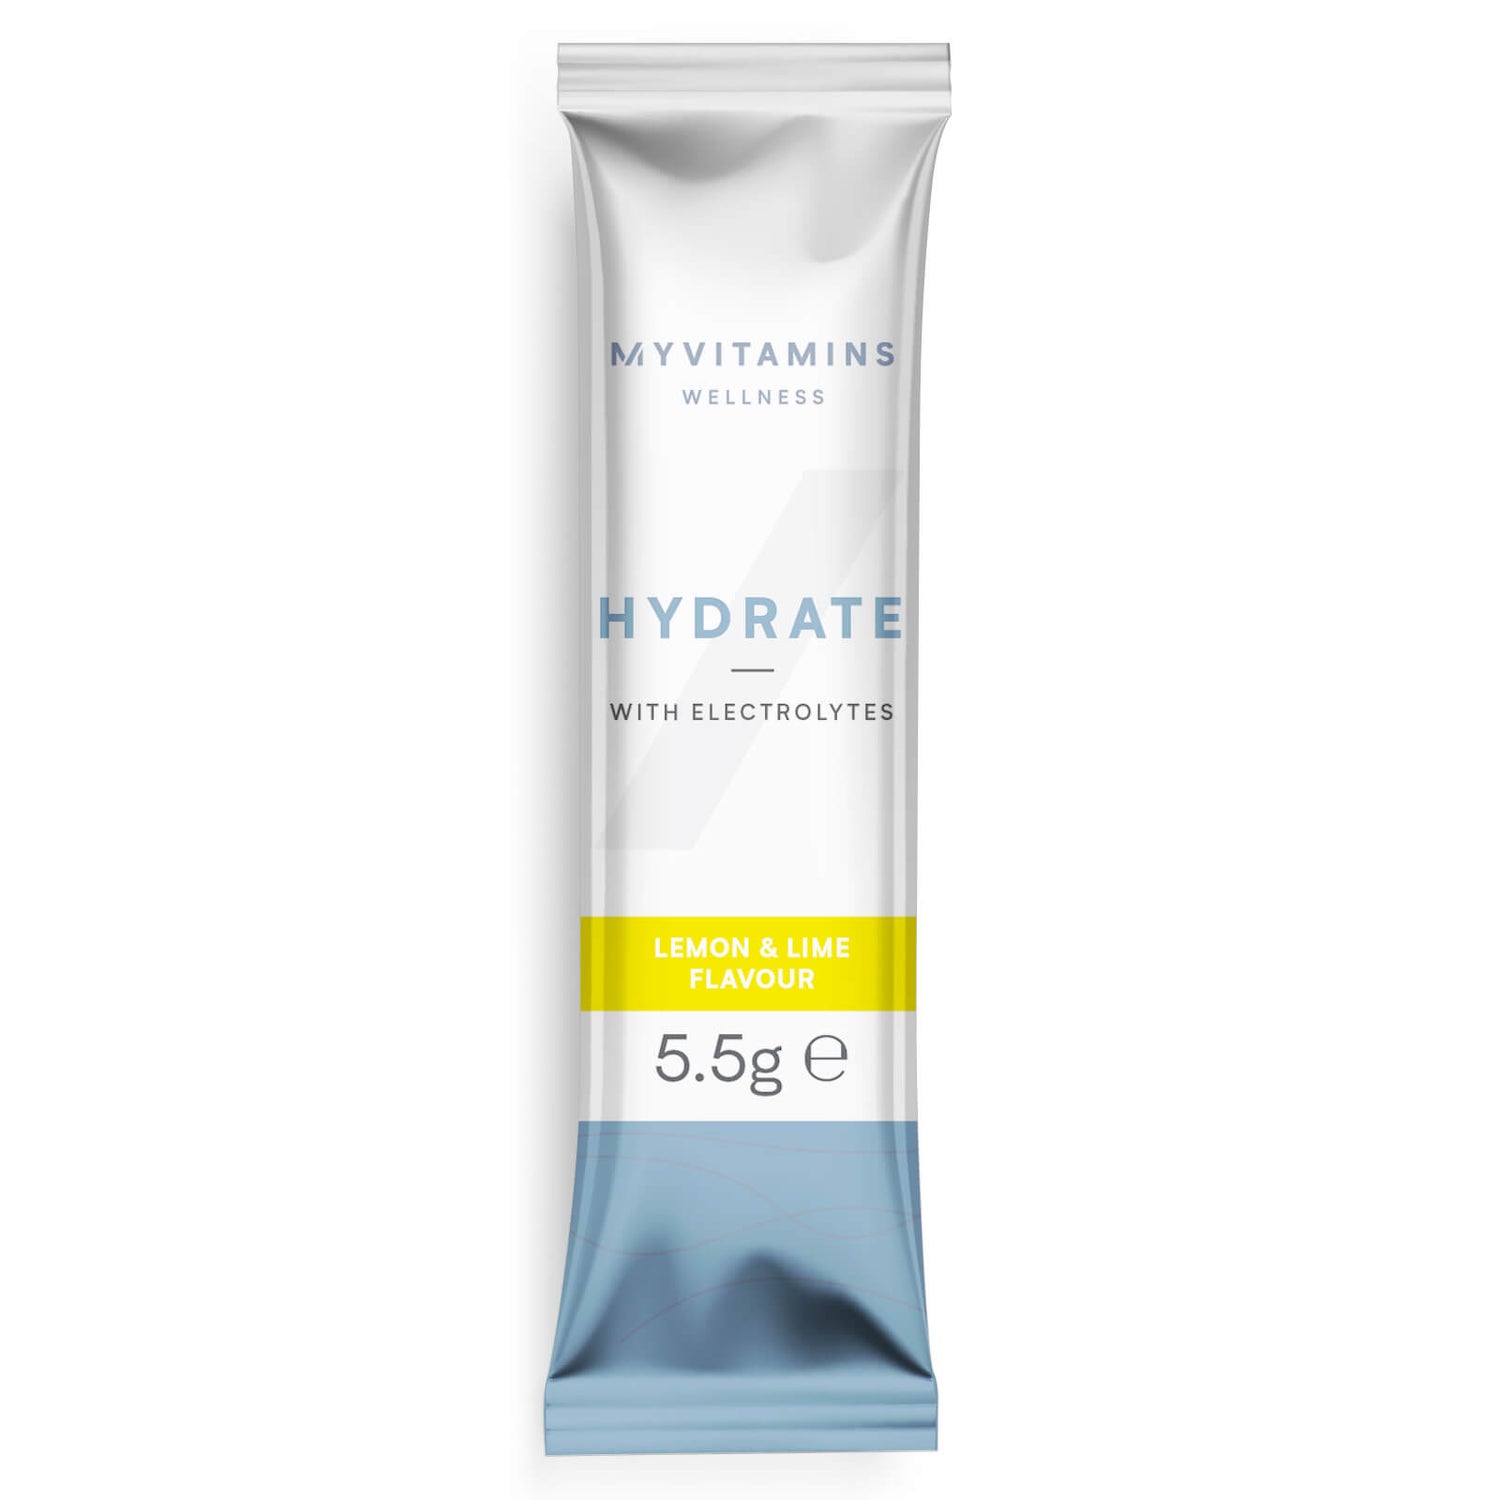 Myvitamins Hydrate (Sample) - Lemon and Lime